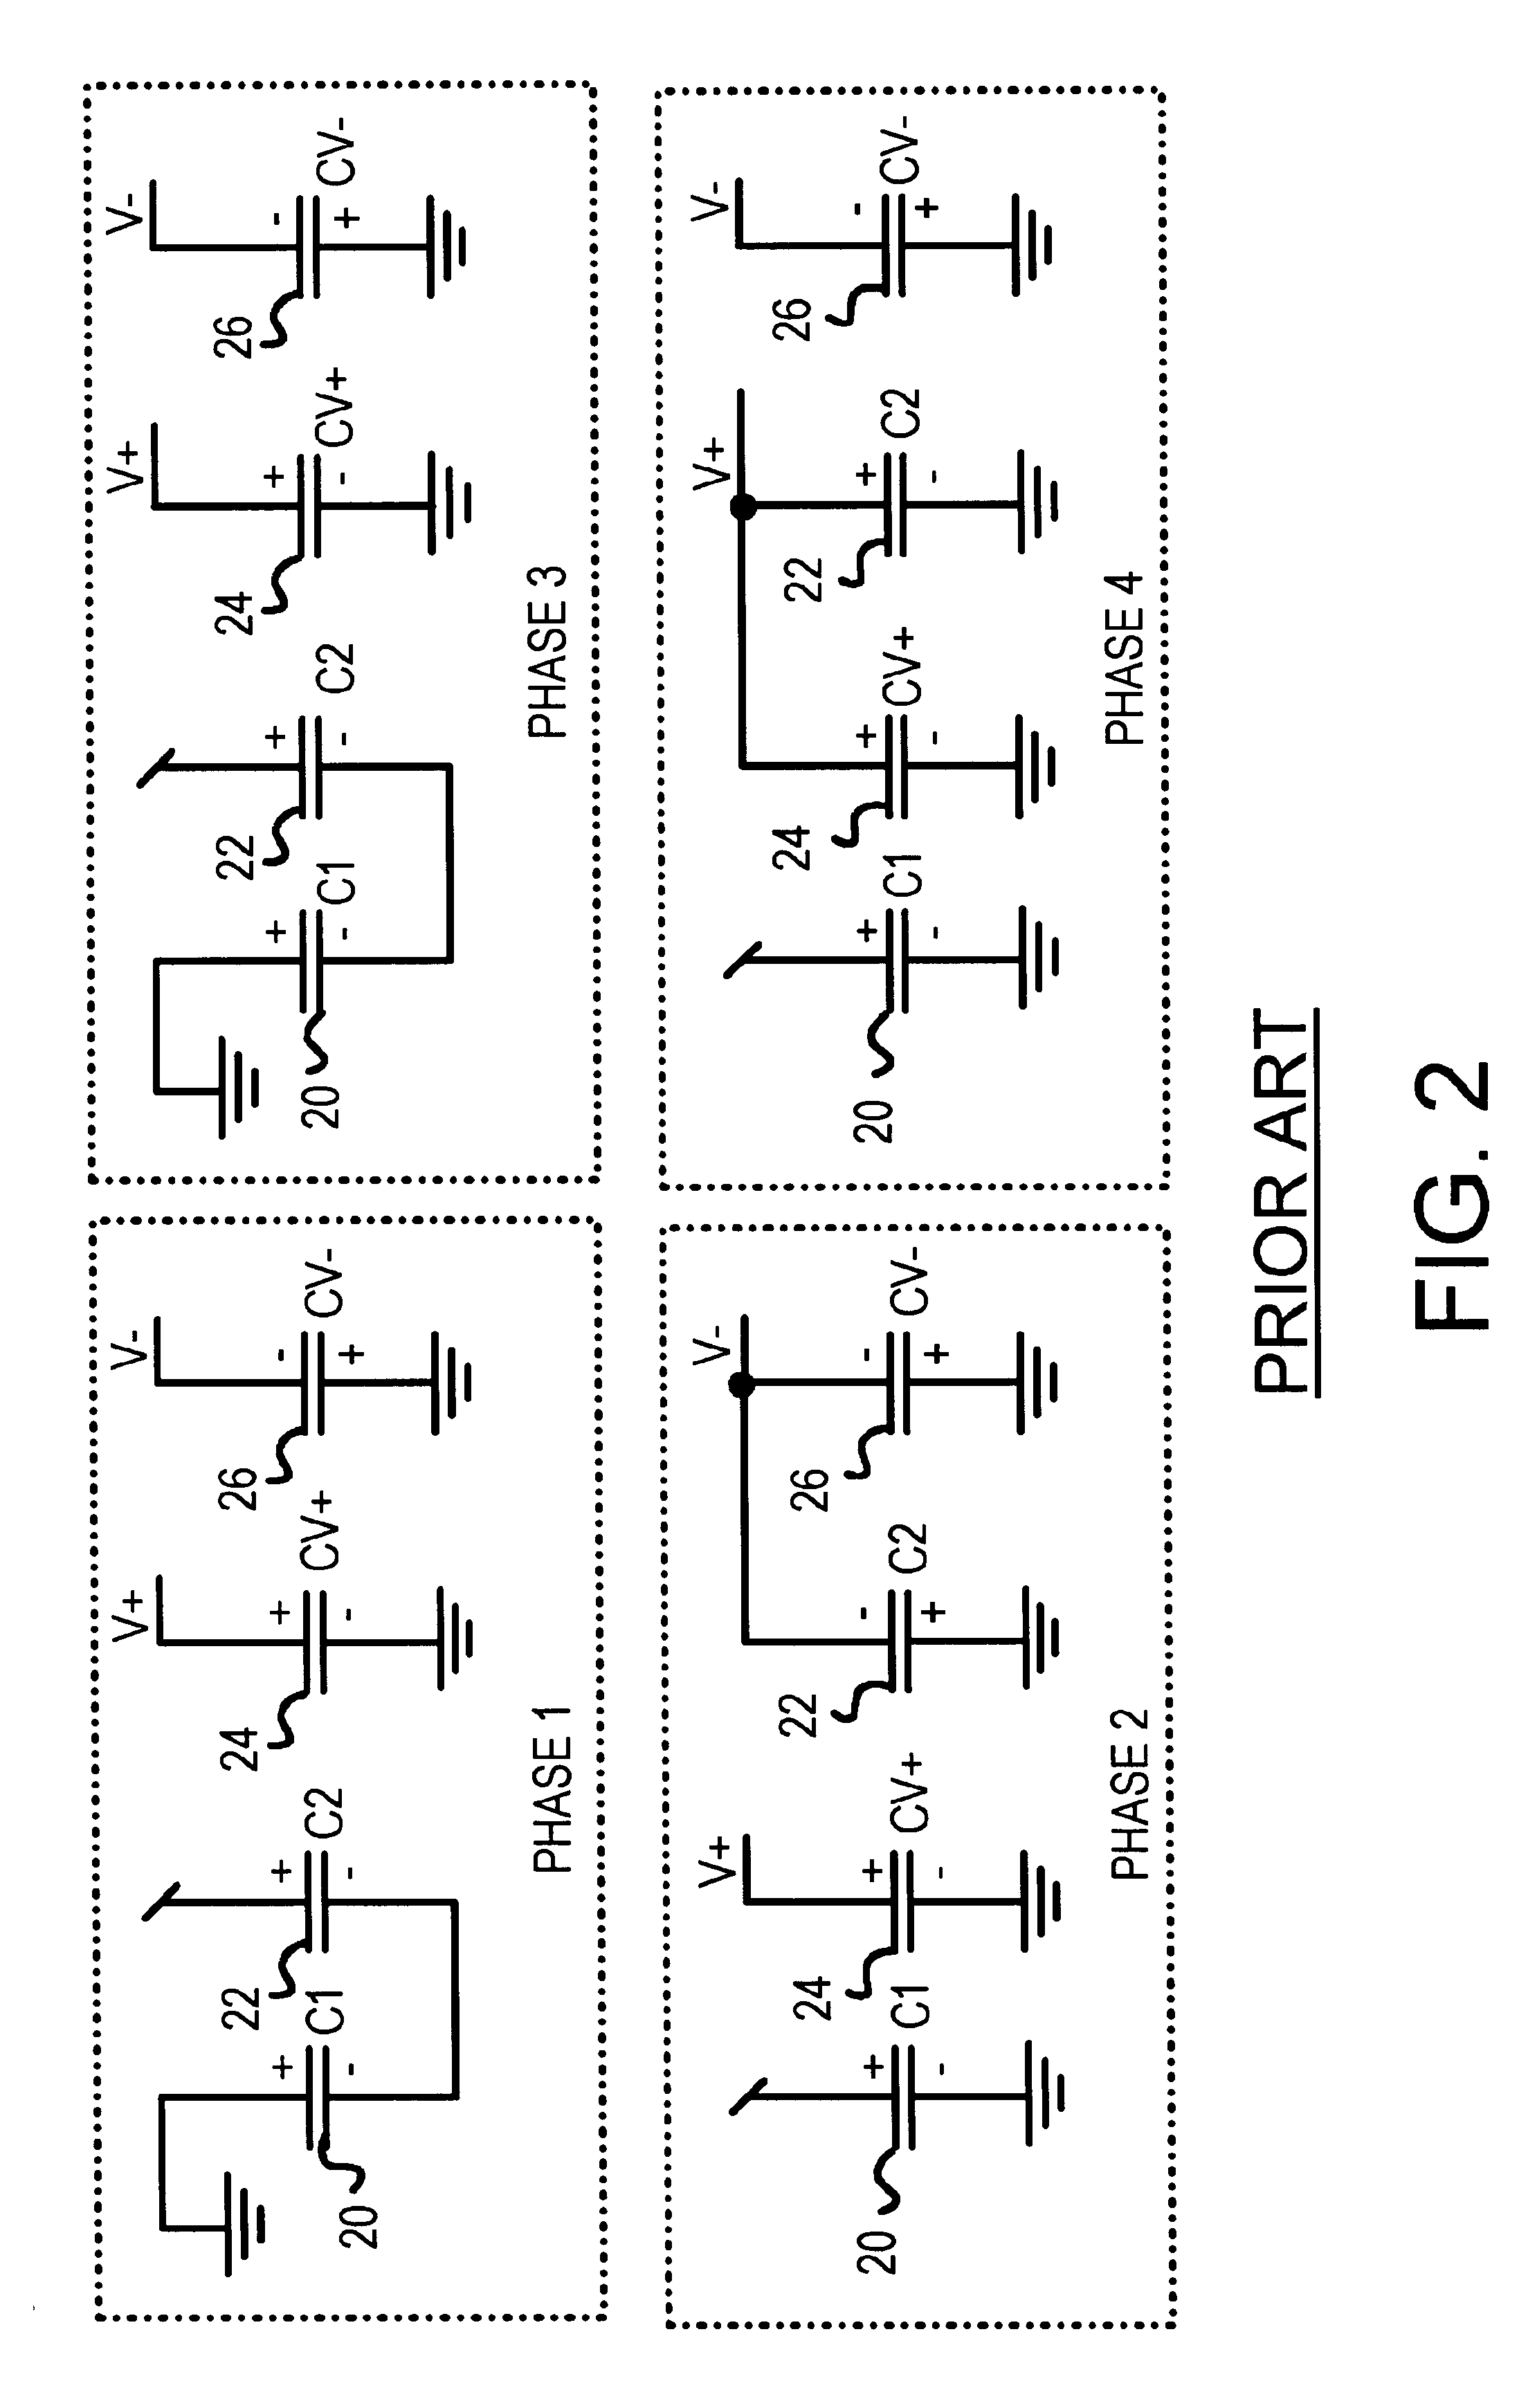 Asymmetric-amplitude dual-polarity charge pump with four-phase selectable operation